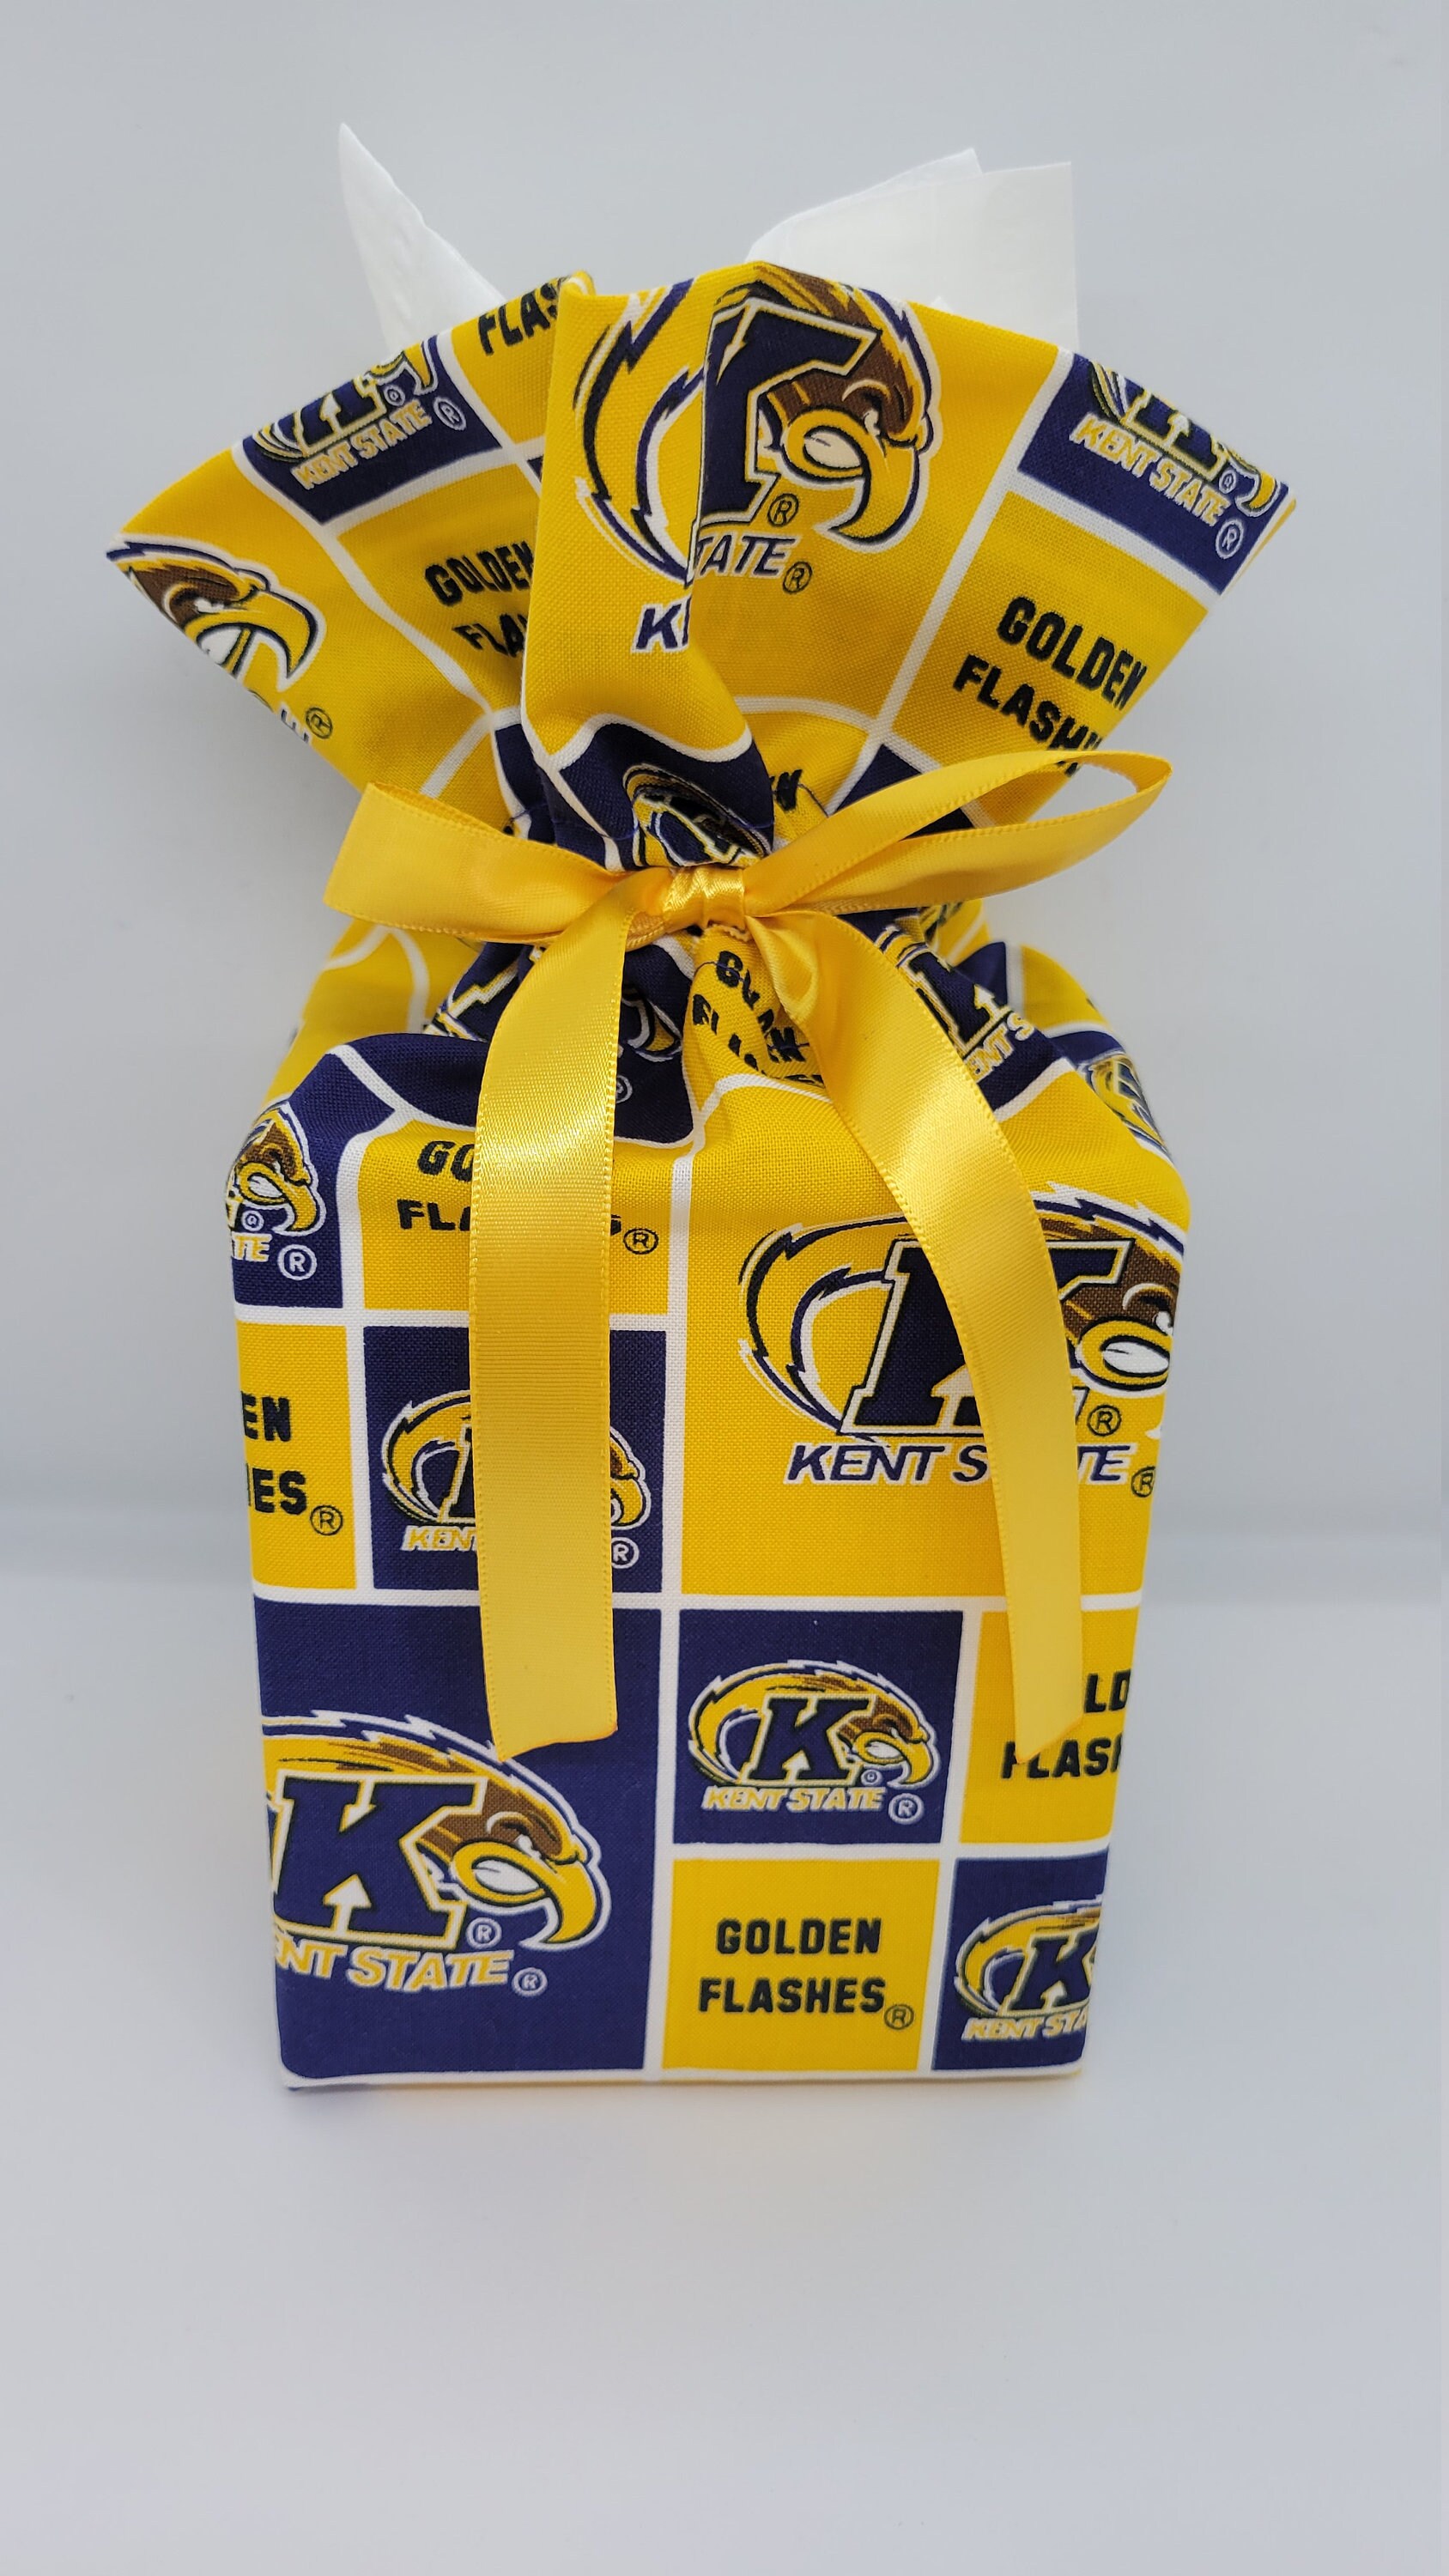 Kent State University Cotton Fabric By Sykel-Kent Golden Flashes